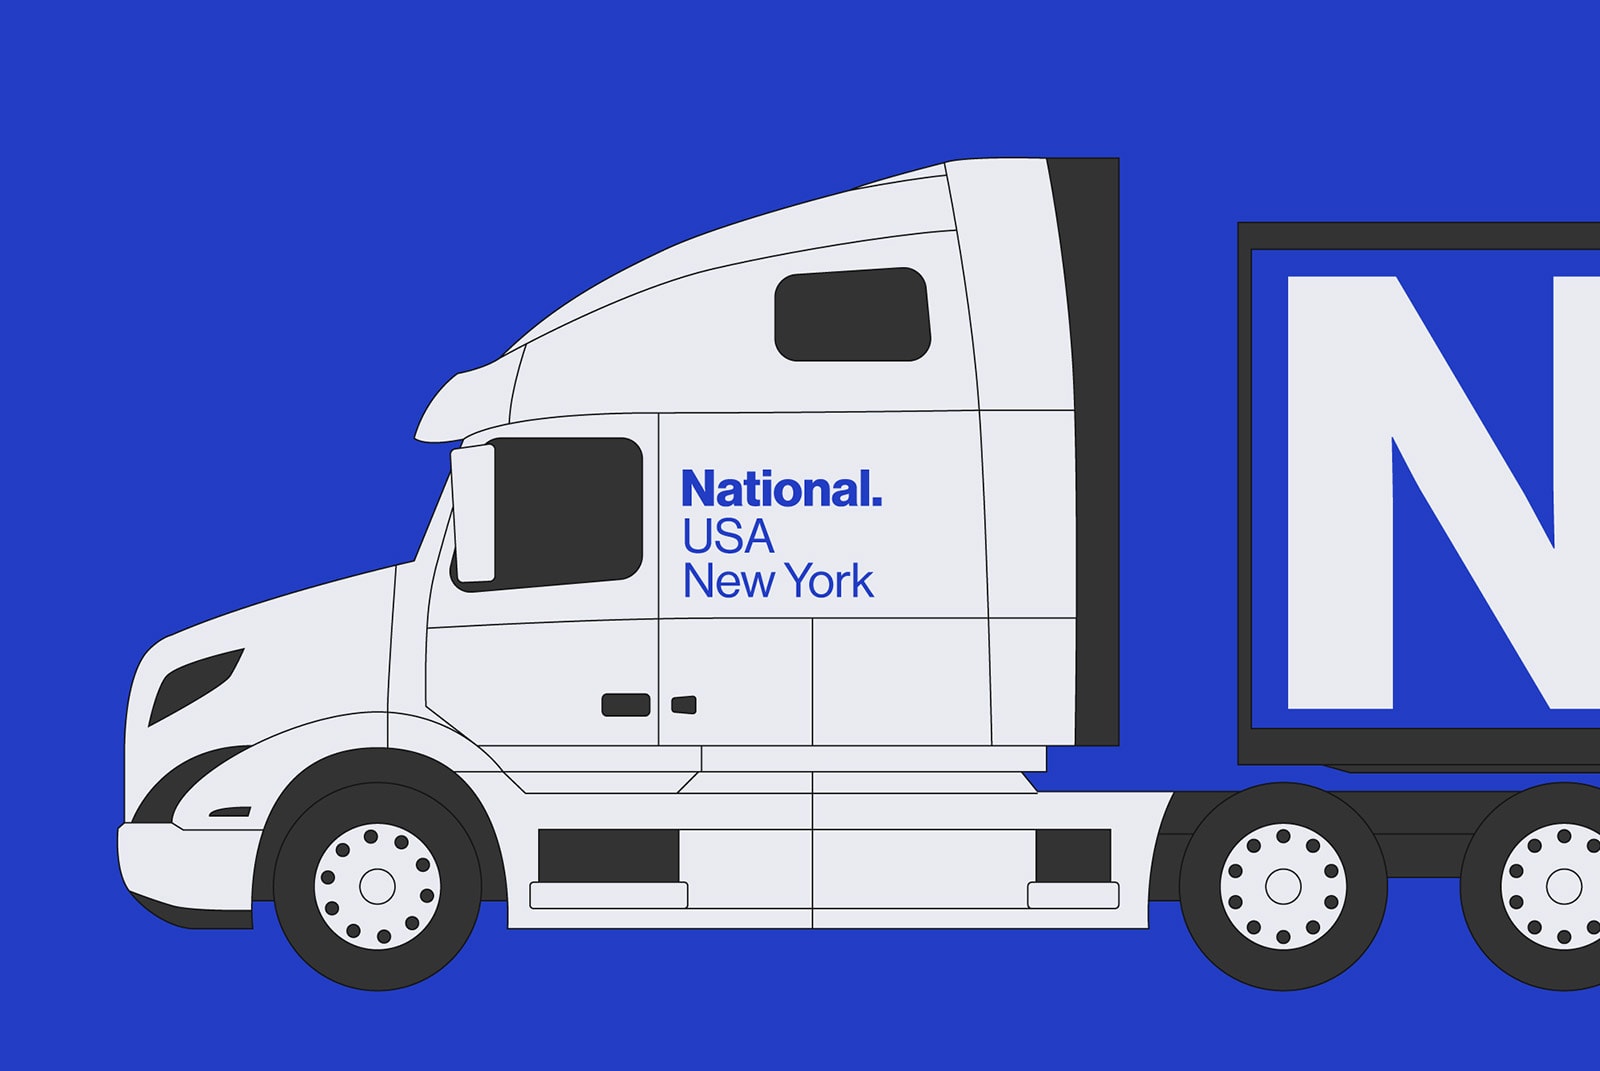 Vector illustration of white semi truck with blue accents and 'National USA New York' text on side, perfect for graphics or mockups.